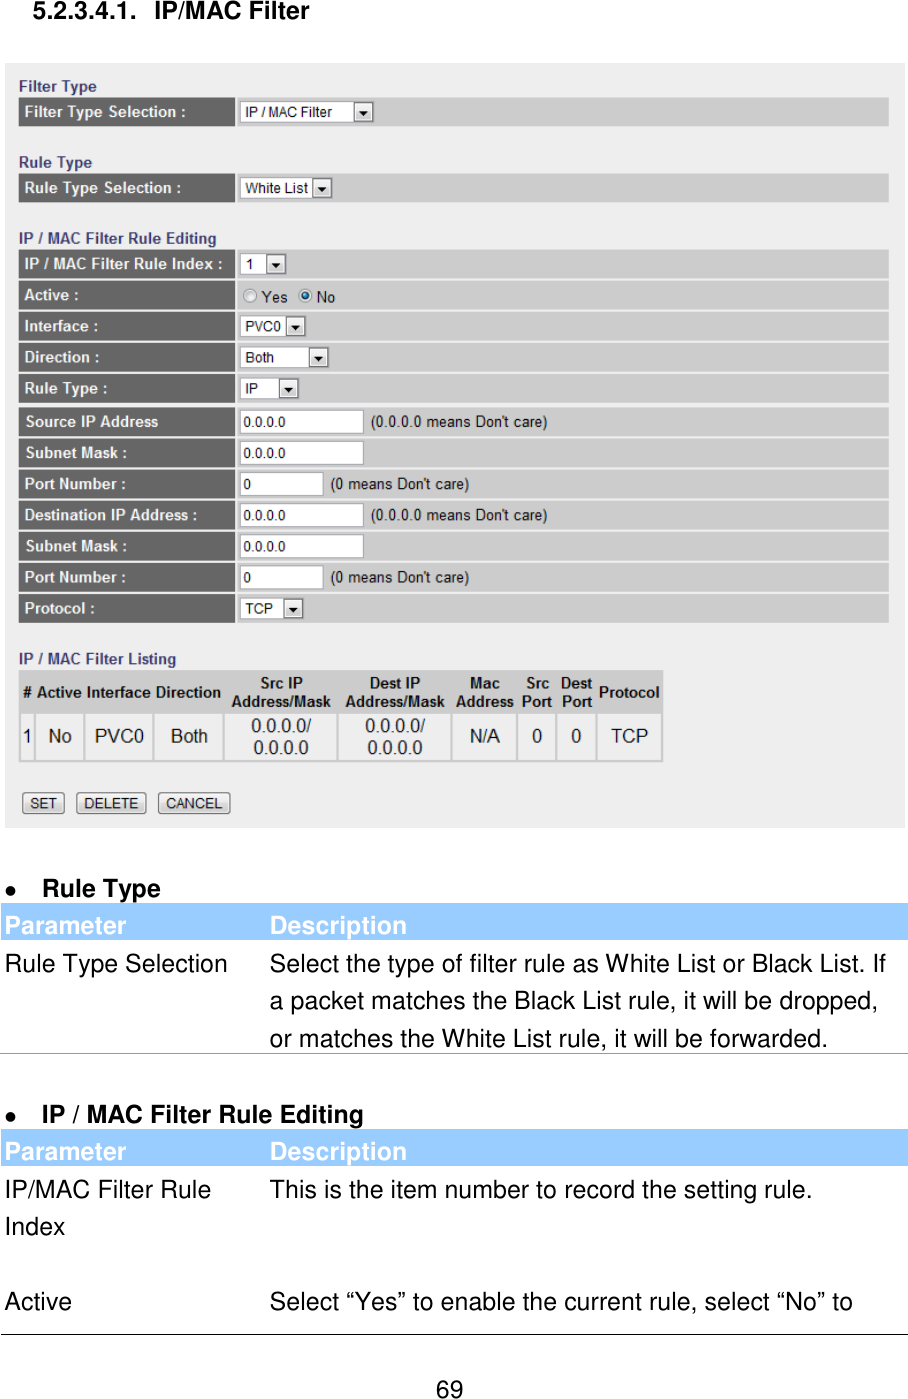   69 5.2.3.4.1.  IP/MAC Filter     Rule Type Parameter Description Rule Type Selection Select the type of filter rule as White List or Black List. If a packet matches the Black List rule, it will be dropped, or matches the White List rule, it will be forwarded.    IP / MAC Filter Rule Editing Parameter Description IP/MAC Filter Rule Index This is the item number to record the setting rule.   Active Select “Yes” to enable the current rule, select “No” to 